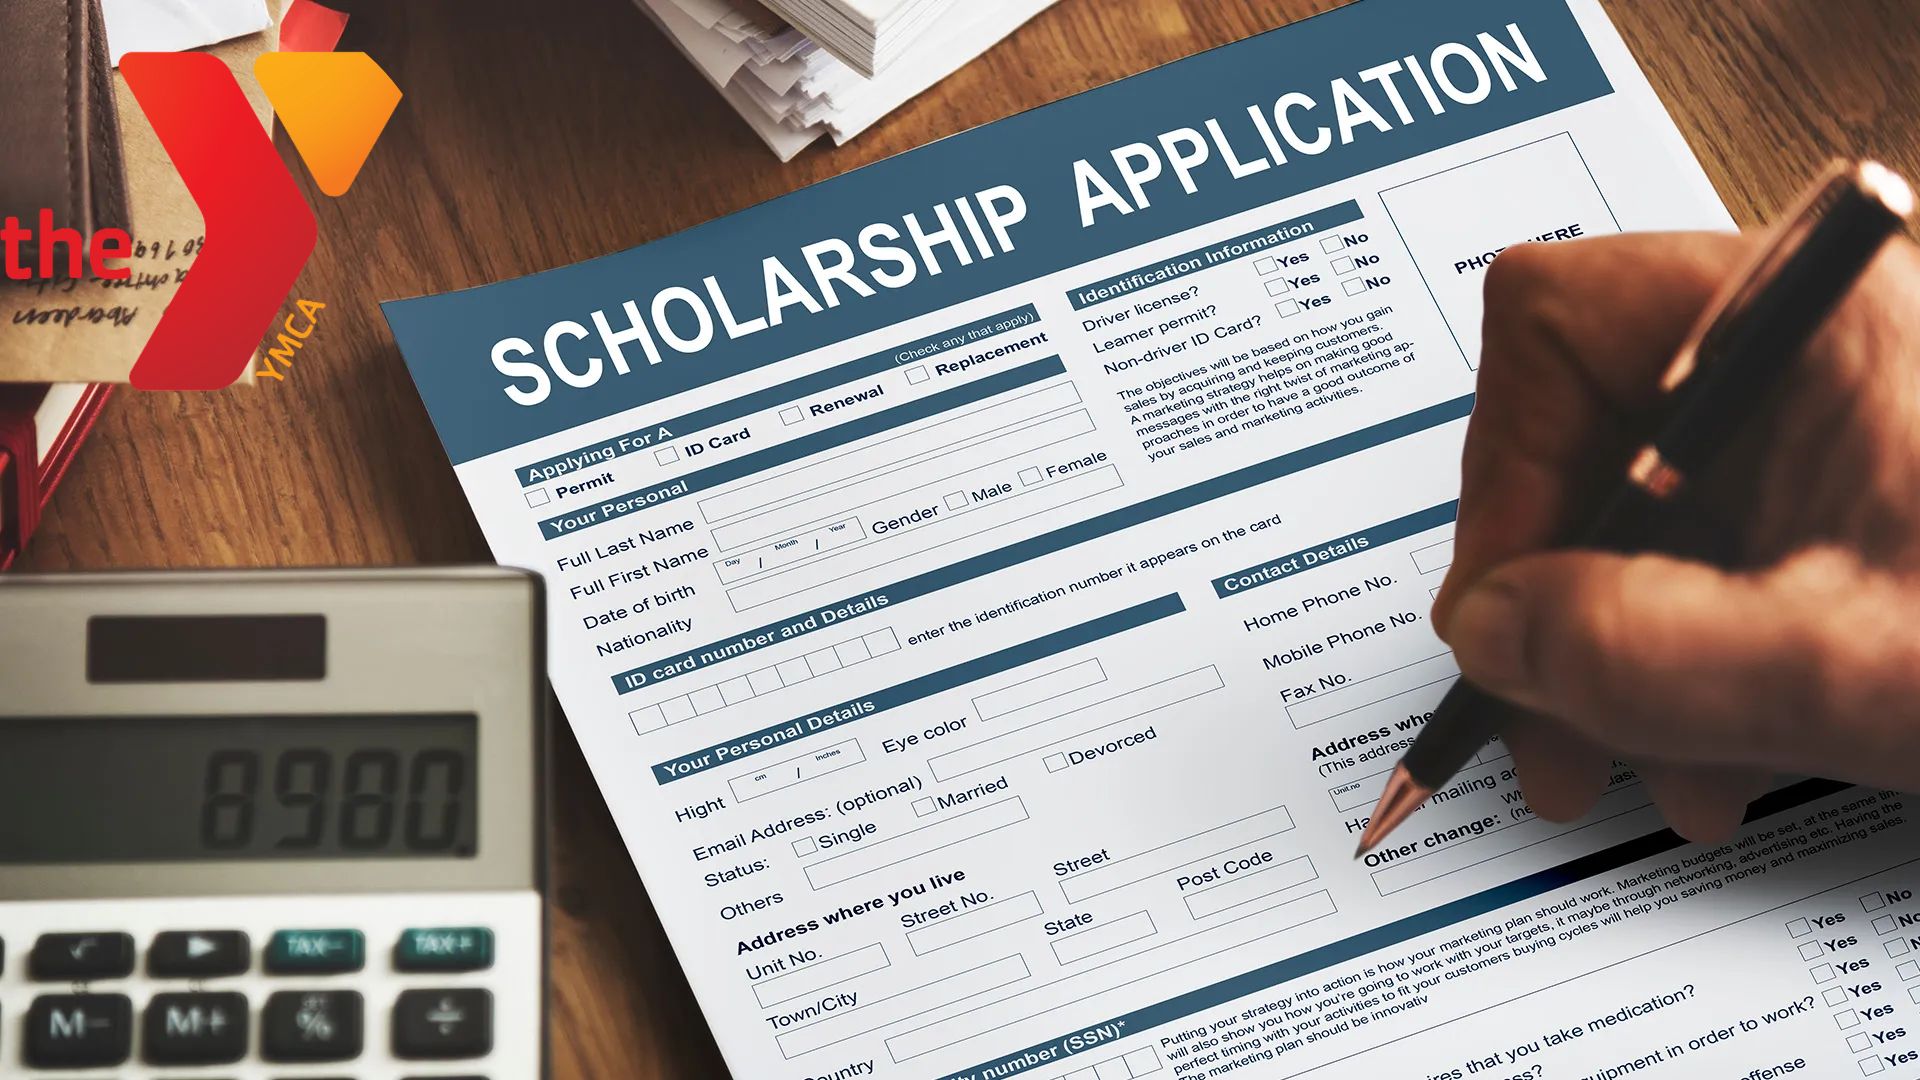 The Scholarship Application Process.